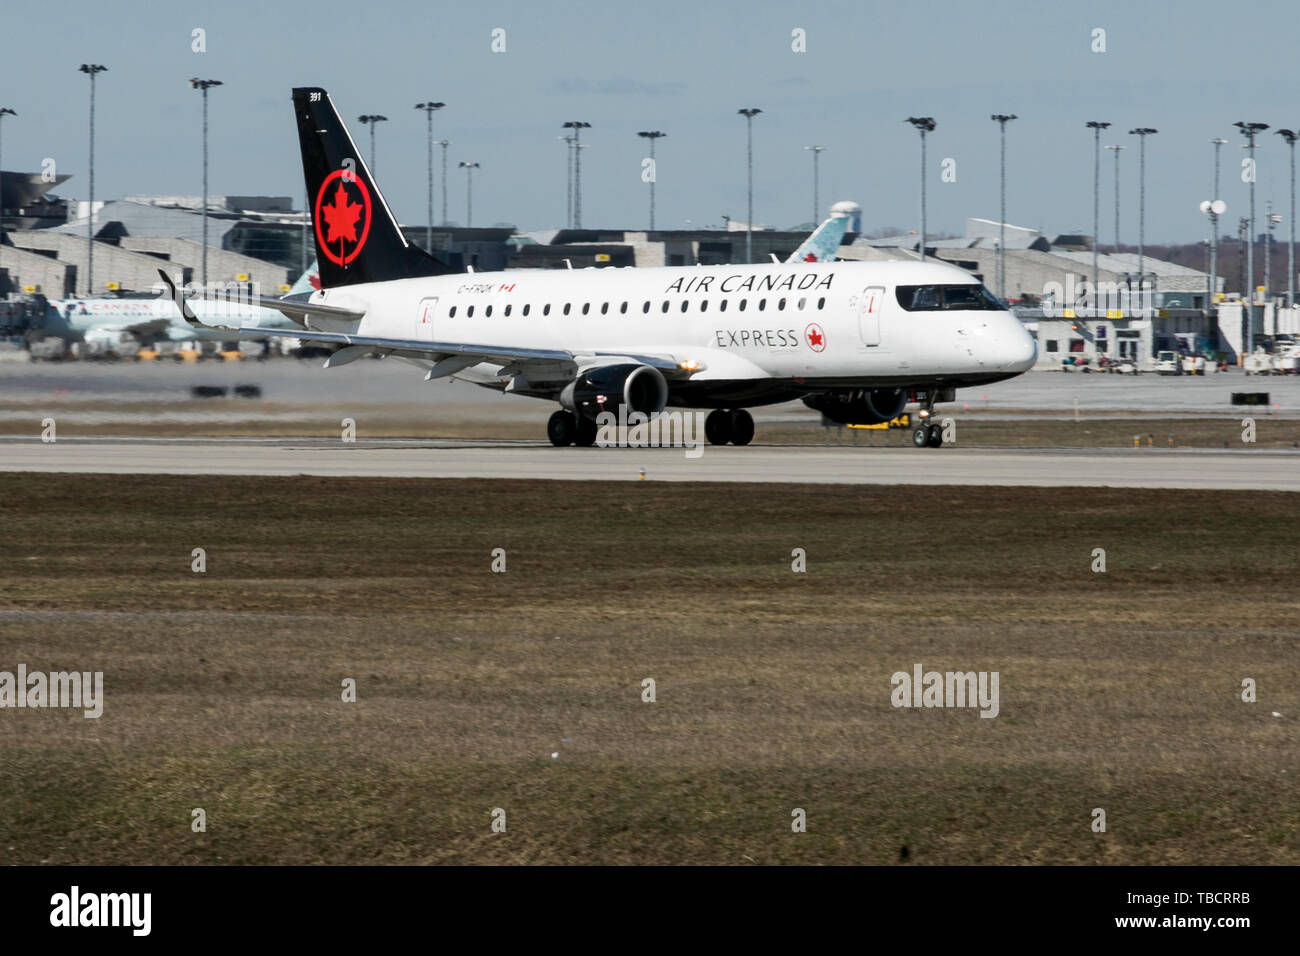 A Air Canada Express Embraer ERJ170 airplane is seen departing Montreal Pierre Elliott Trudeau International Airport in Montreal, Quebec, Canada, on A Stock Photo